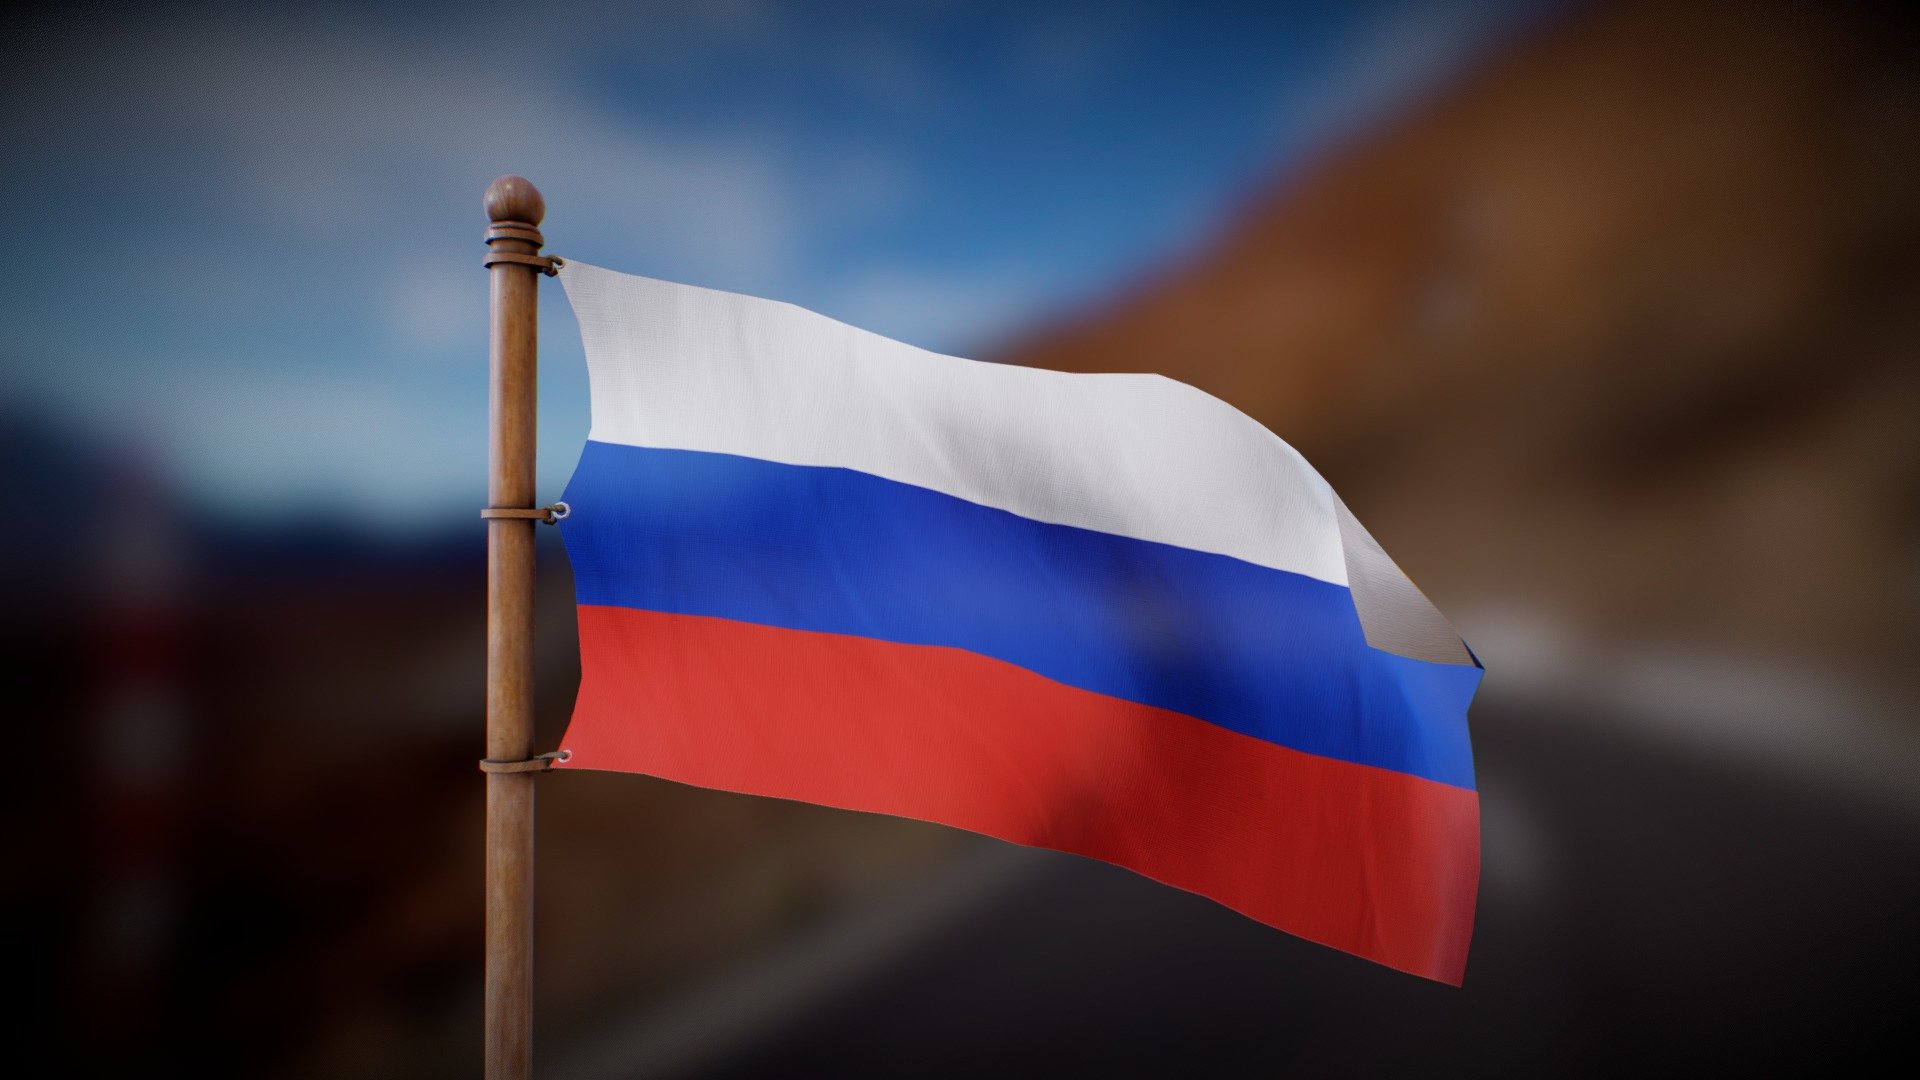 Flag waving in the wind in a looped animation

Joint Animation, perfect for any purpose
4K PBR textures

Feel free to DM me for anu question of custom requests :) - Russia Flag - Wind Animated Loop - Buy Royalty Free 3D model by Deftroy 3d model